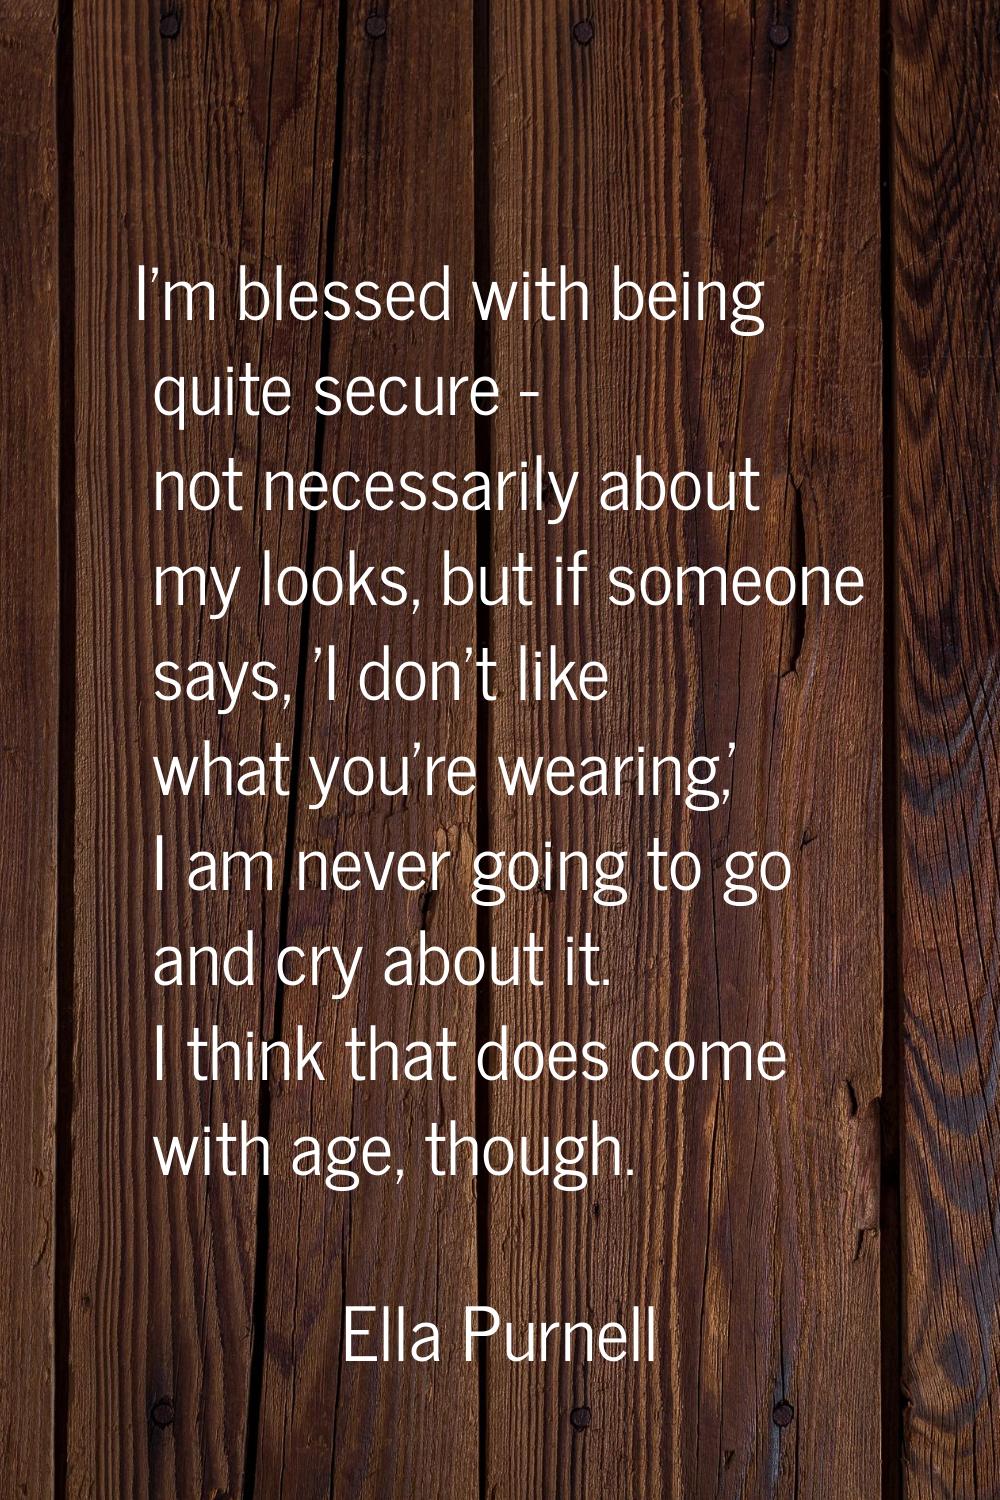 I'm blessed with being quite secure - not necessarily about my looks, but if someone says, 'I don't